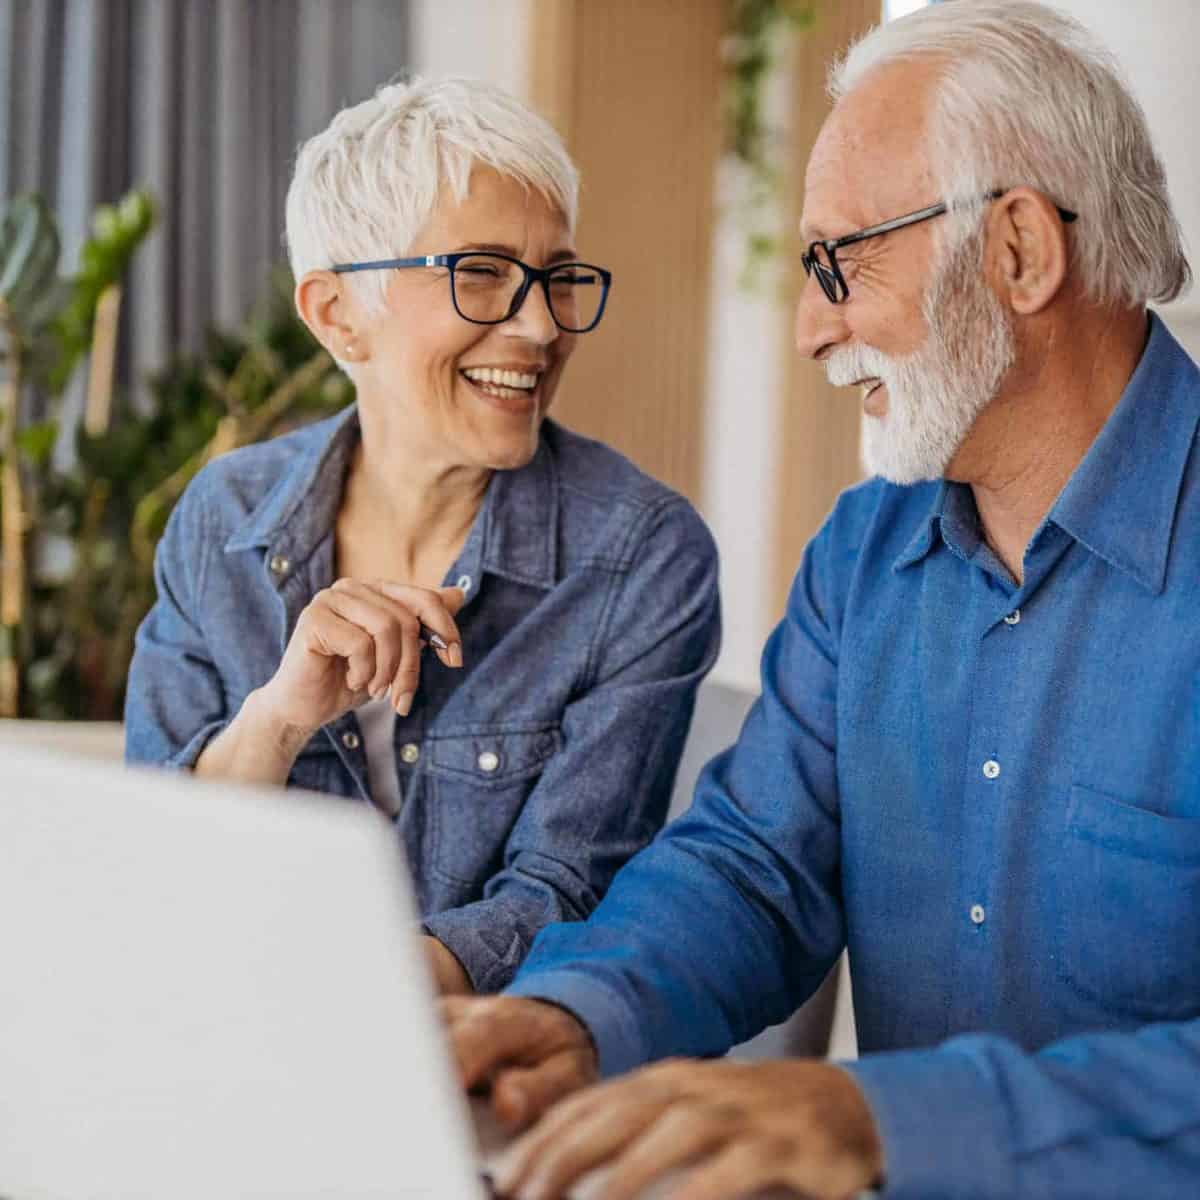 LAWNDALE Precious Metals IRA & Investing Company Copy of Senior couple at laptop smiling GettyImages 1323096524 1200x1200 1